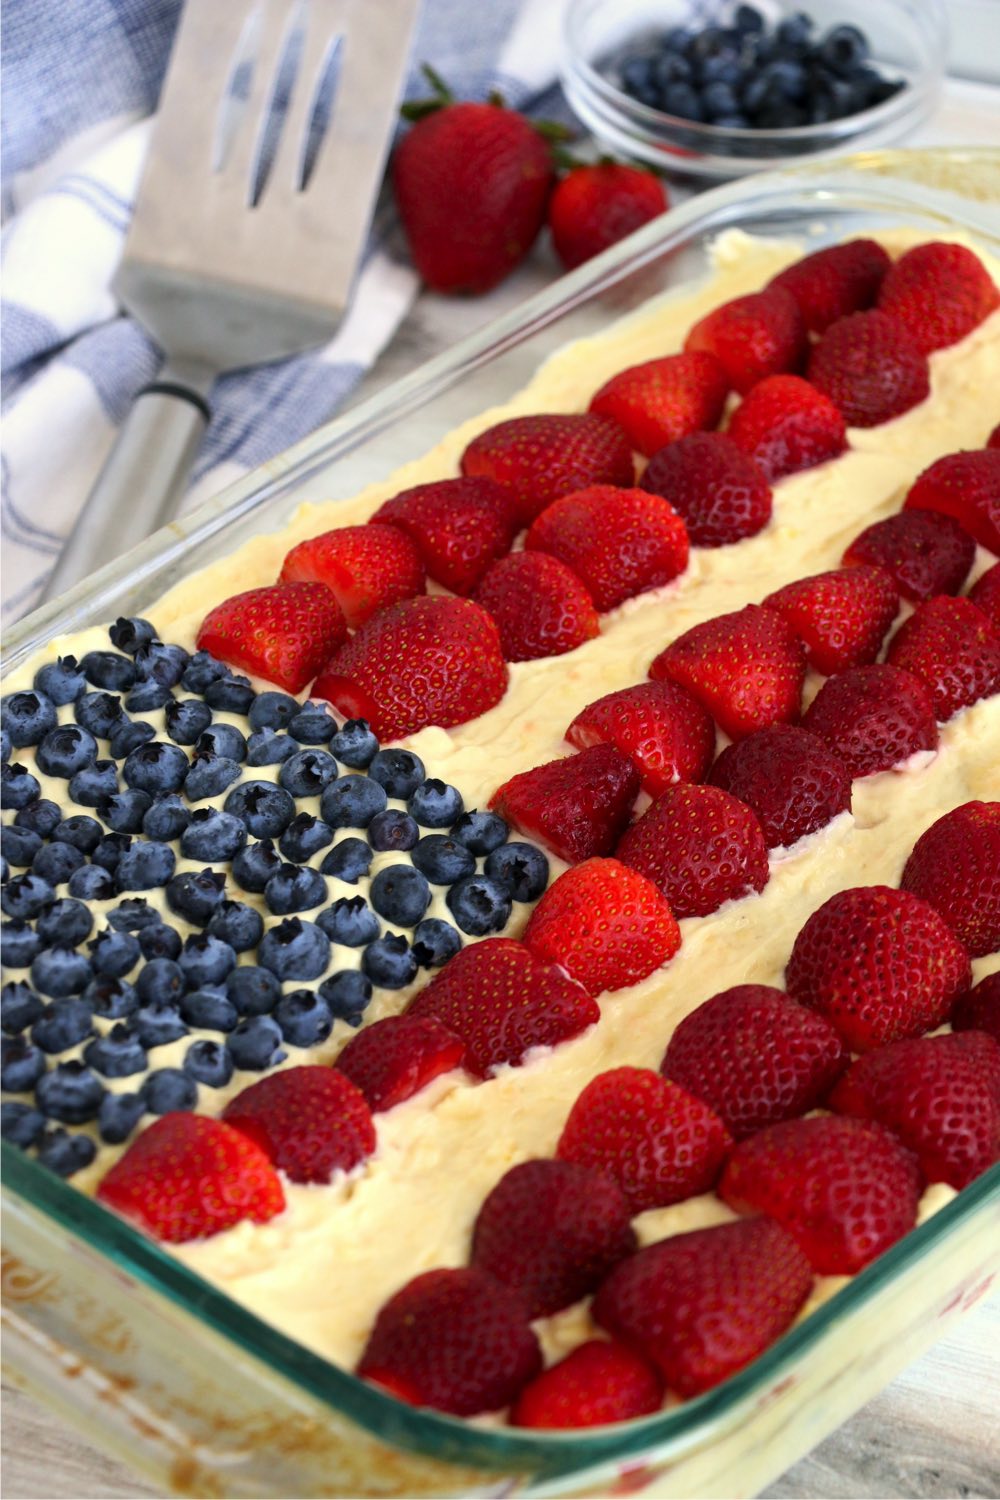 Icebox cake with red, white and blue flag design